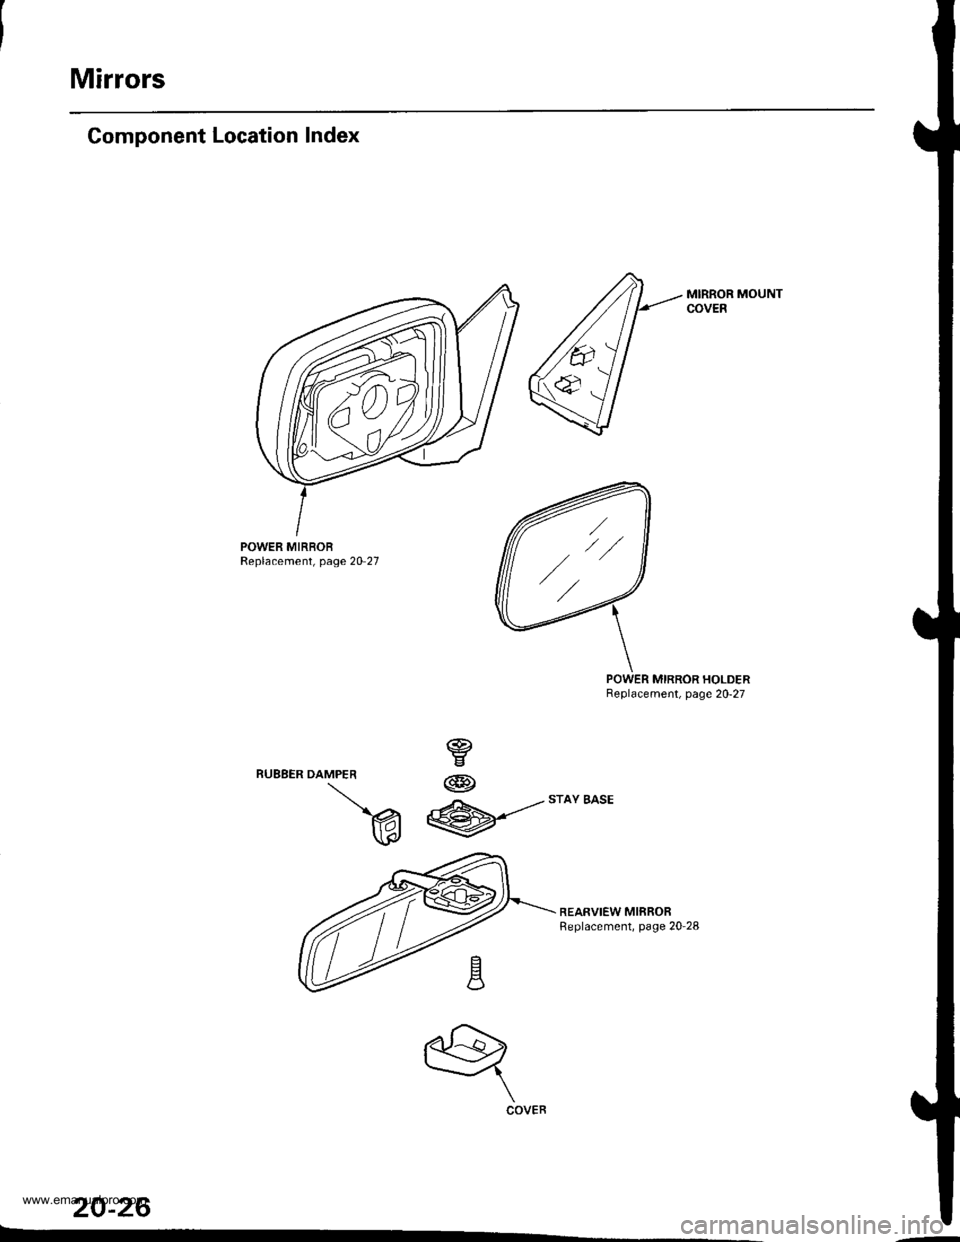 HONDA CR-V 1999 RD1-RD3 / 1.G Workshop Manual 
Mirrors
Component Location Index
MIRROR MOUNTCOVEB
POWER MIRBORReplacement, page 20 27
MIRROR HOLDERBeplacement, page 20-27
REARVIEW MIRRORReplacement, page 20-28
20-26
DAMPER
v
W
@
@
w
q
COVER
,//
w